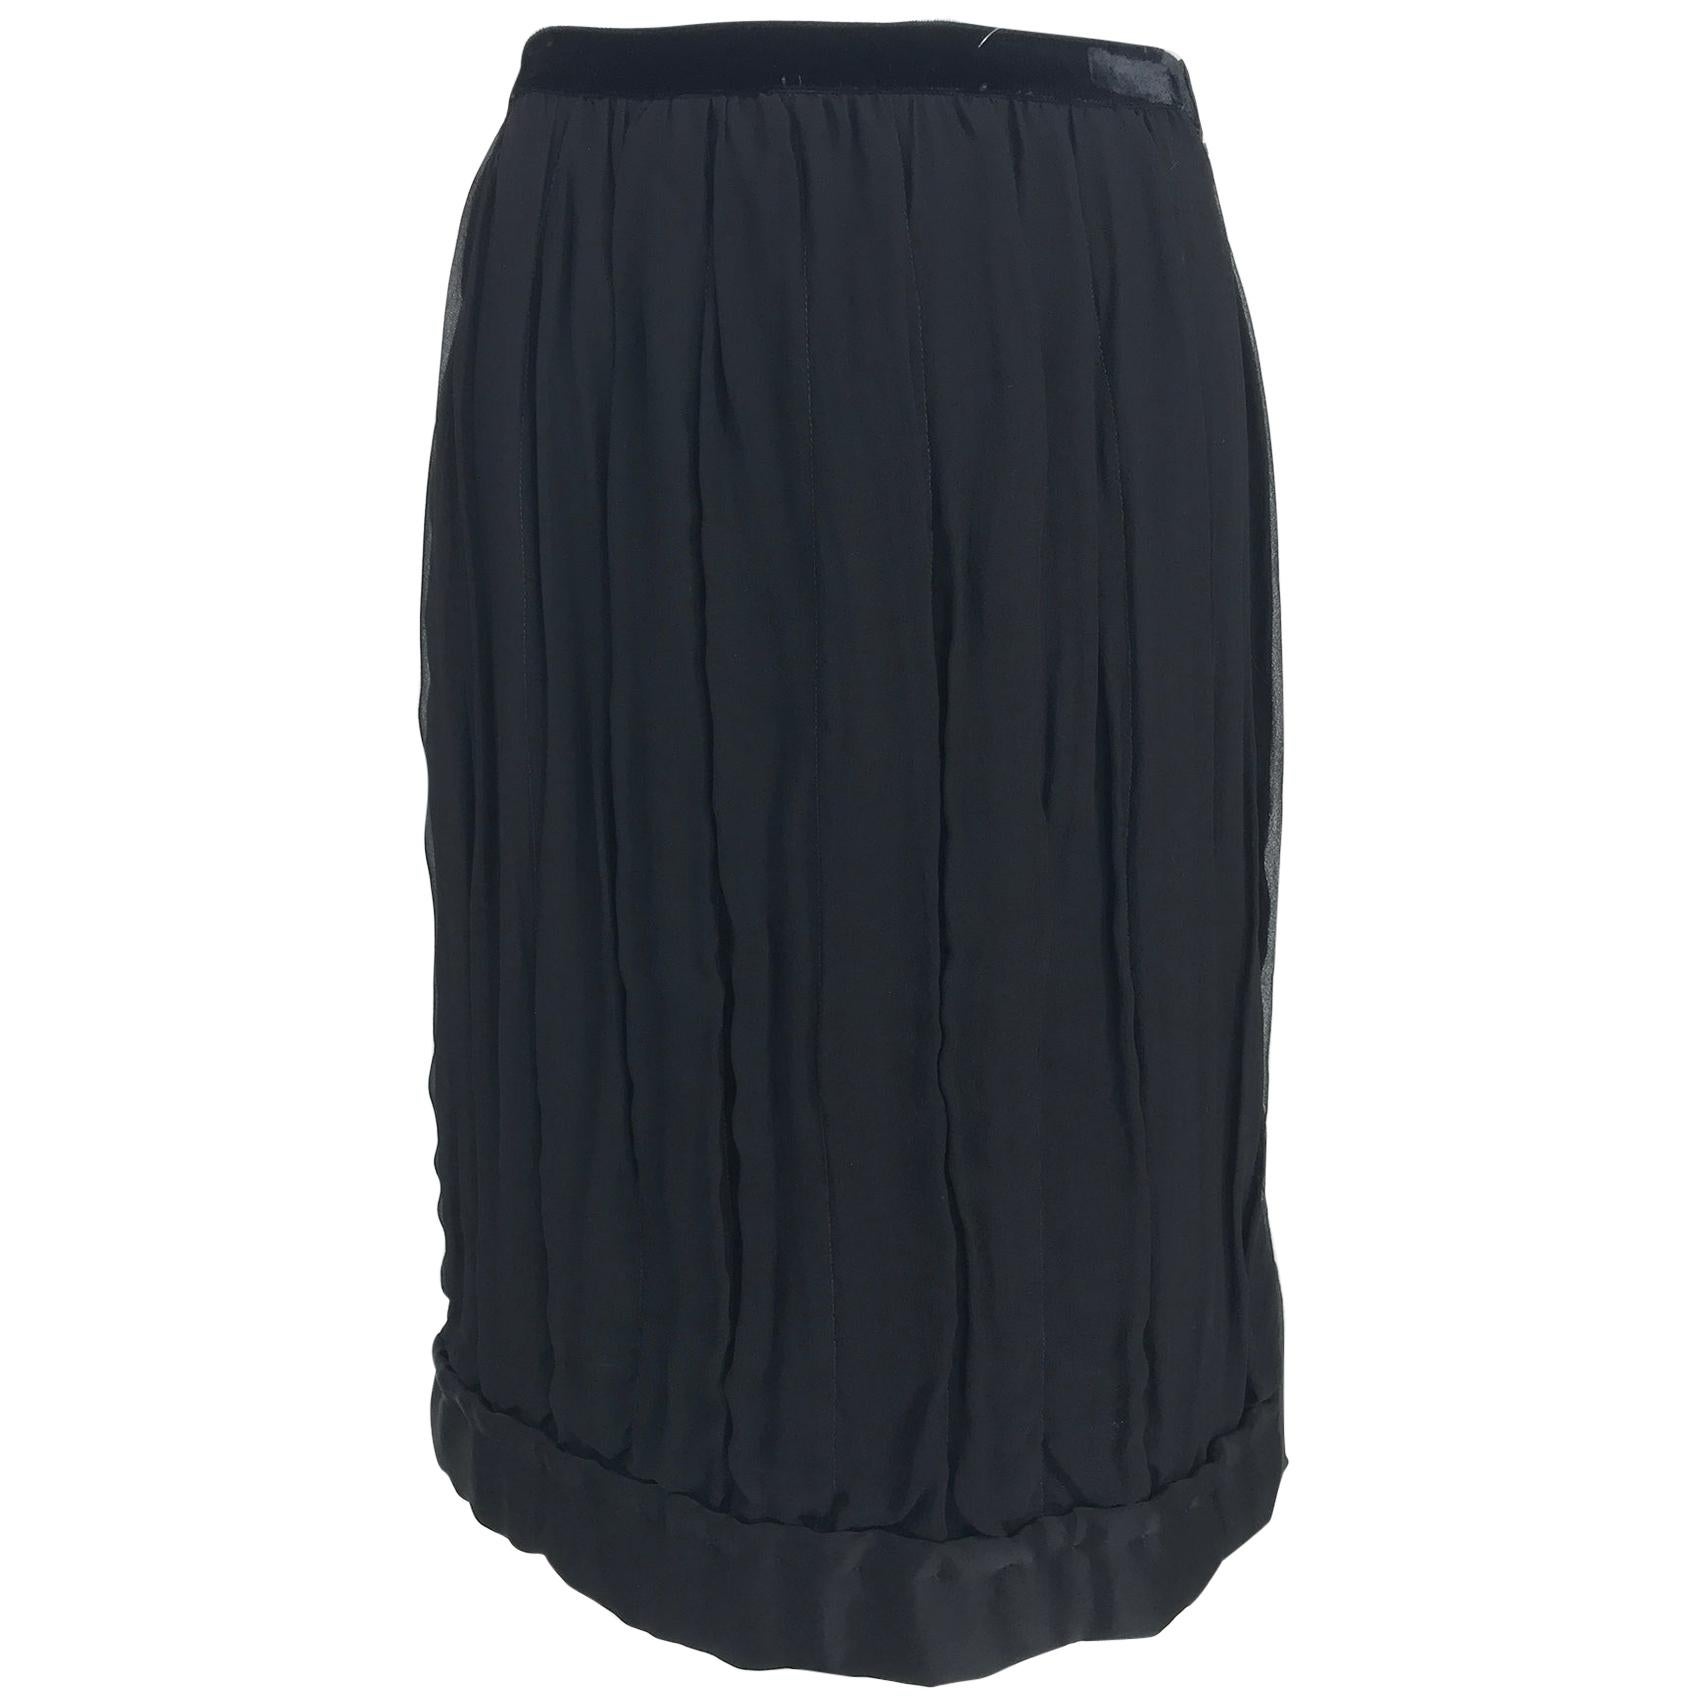 Lanvin Hiver 2006 Black Silk Skirt with Side Button Closure. 